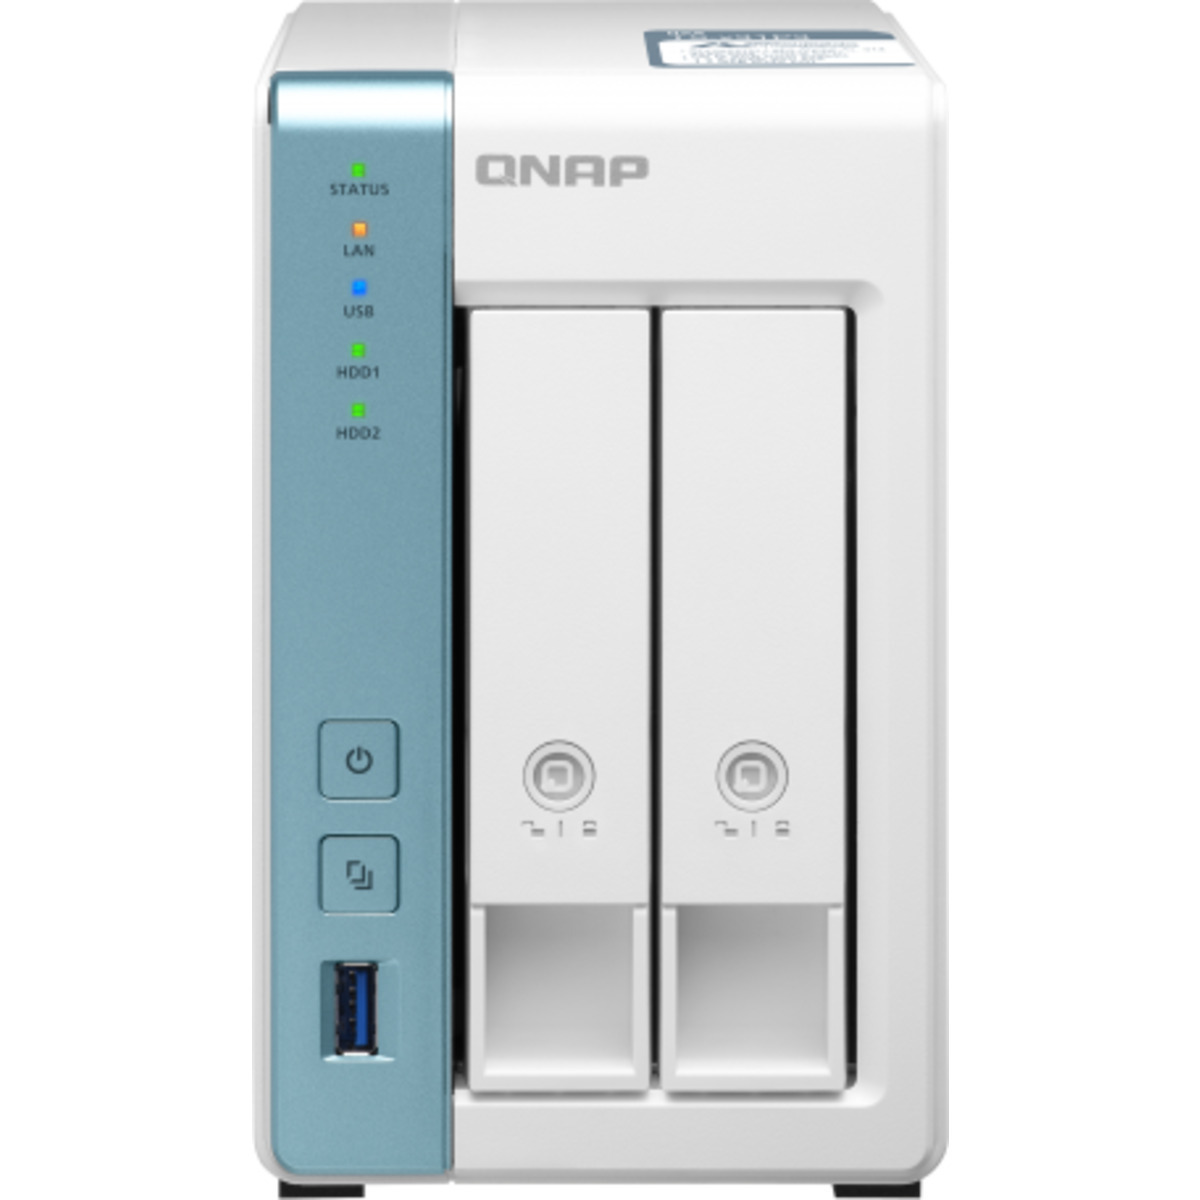 buy $663 QNAP TS-231P3 2tb Desktop NAS - Network Attached Storage Device 2x1000gb Samsung 870 QVO MZ-77Q1T0 2.5 SATA 6Gb/s SSD CONSUMER Class Drives Installed - Burn-In Tested - FREE RAM UPGRADE - nas headquarters buy network attached storage server device das new raid-5 free shipping usa TS-231P3